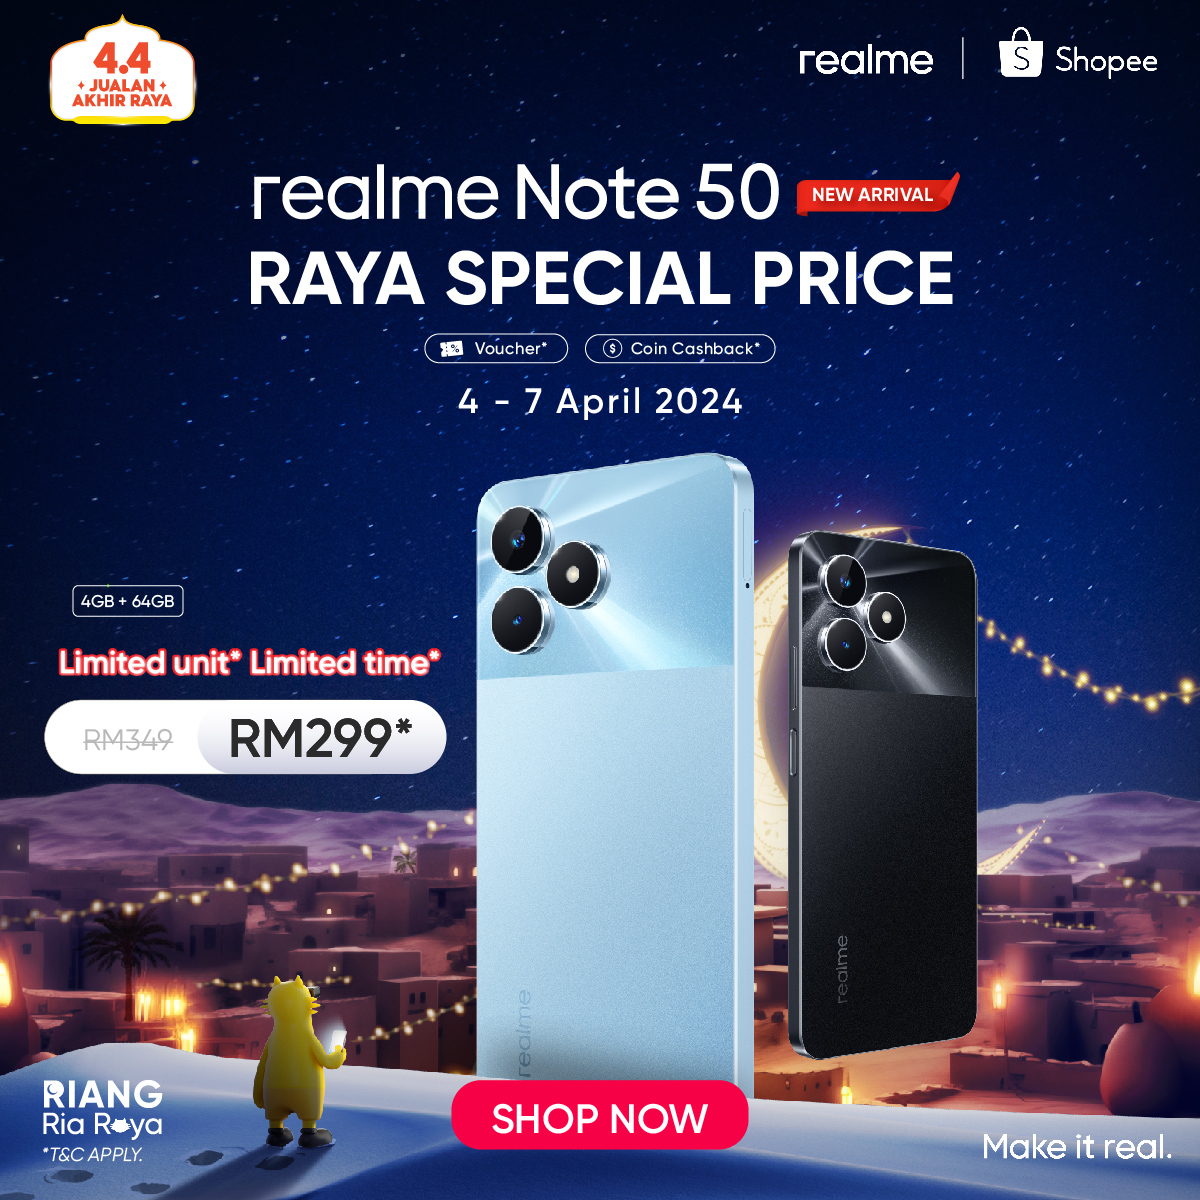 Realme Note 50: Entry level smartphone with 90Hz display, available for as low as RM299